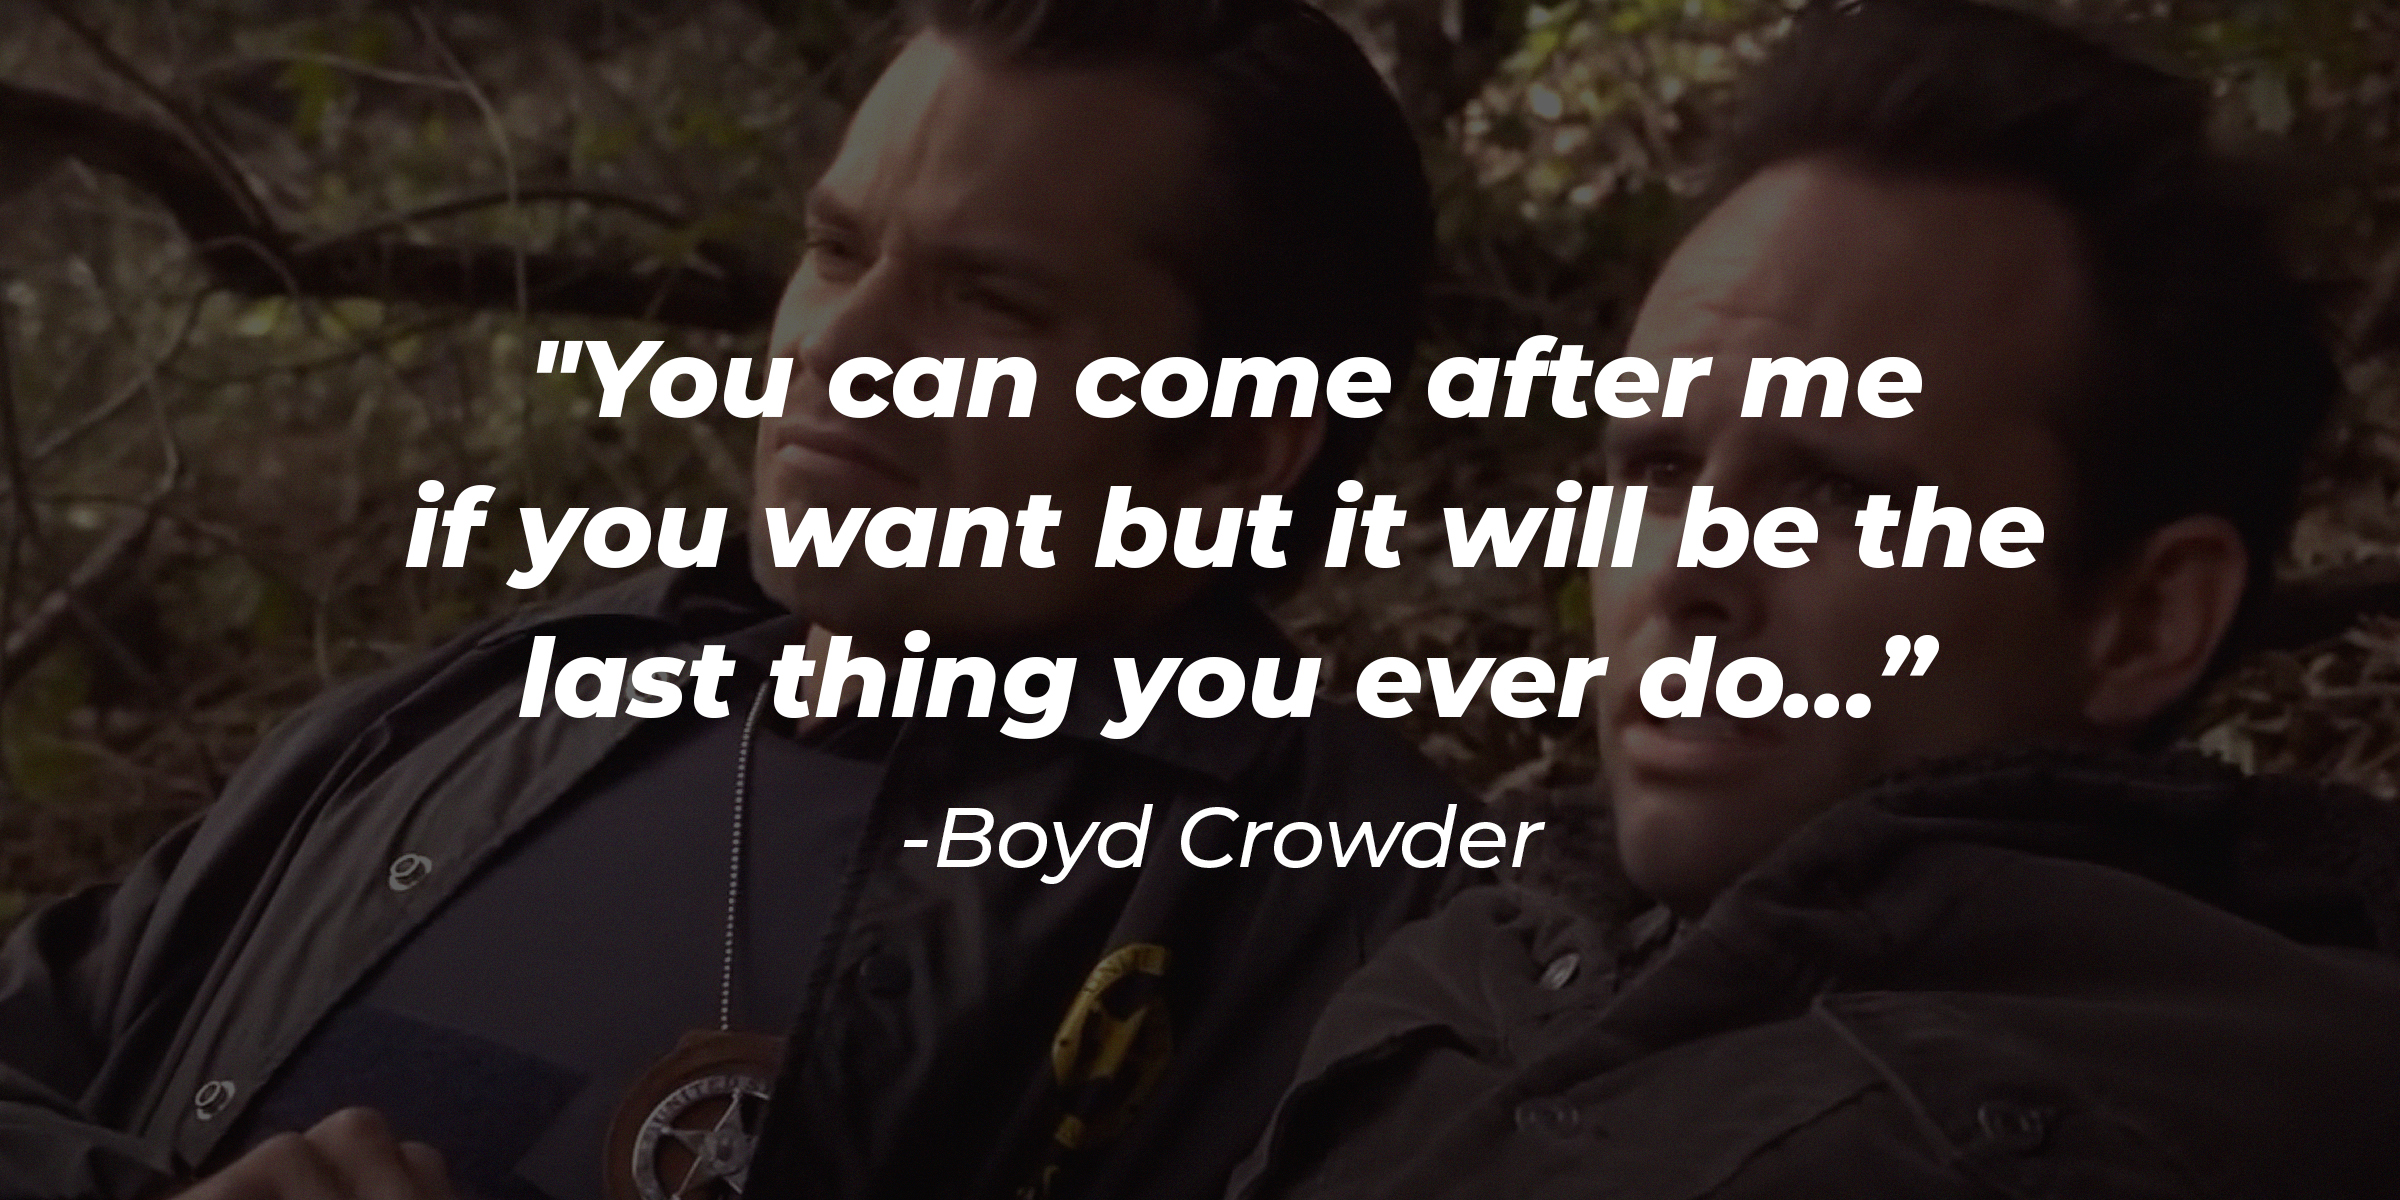 An image of character Raylan Givens and Boyd Crowder with Boyd Crowder’s quote: "You can come after me if you want but it will be the last thing you ever do." | Source: youtube.com/FXNetworks